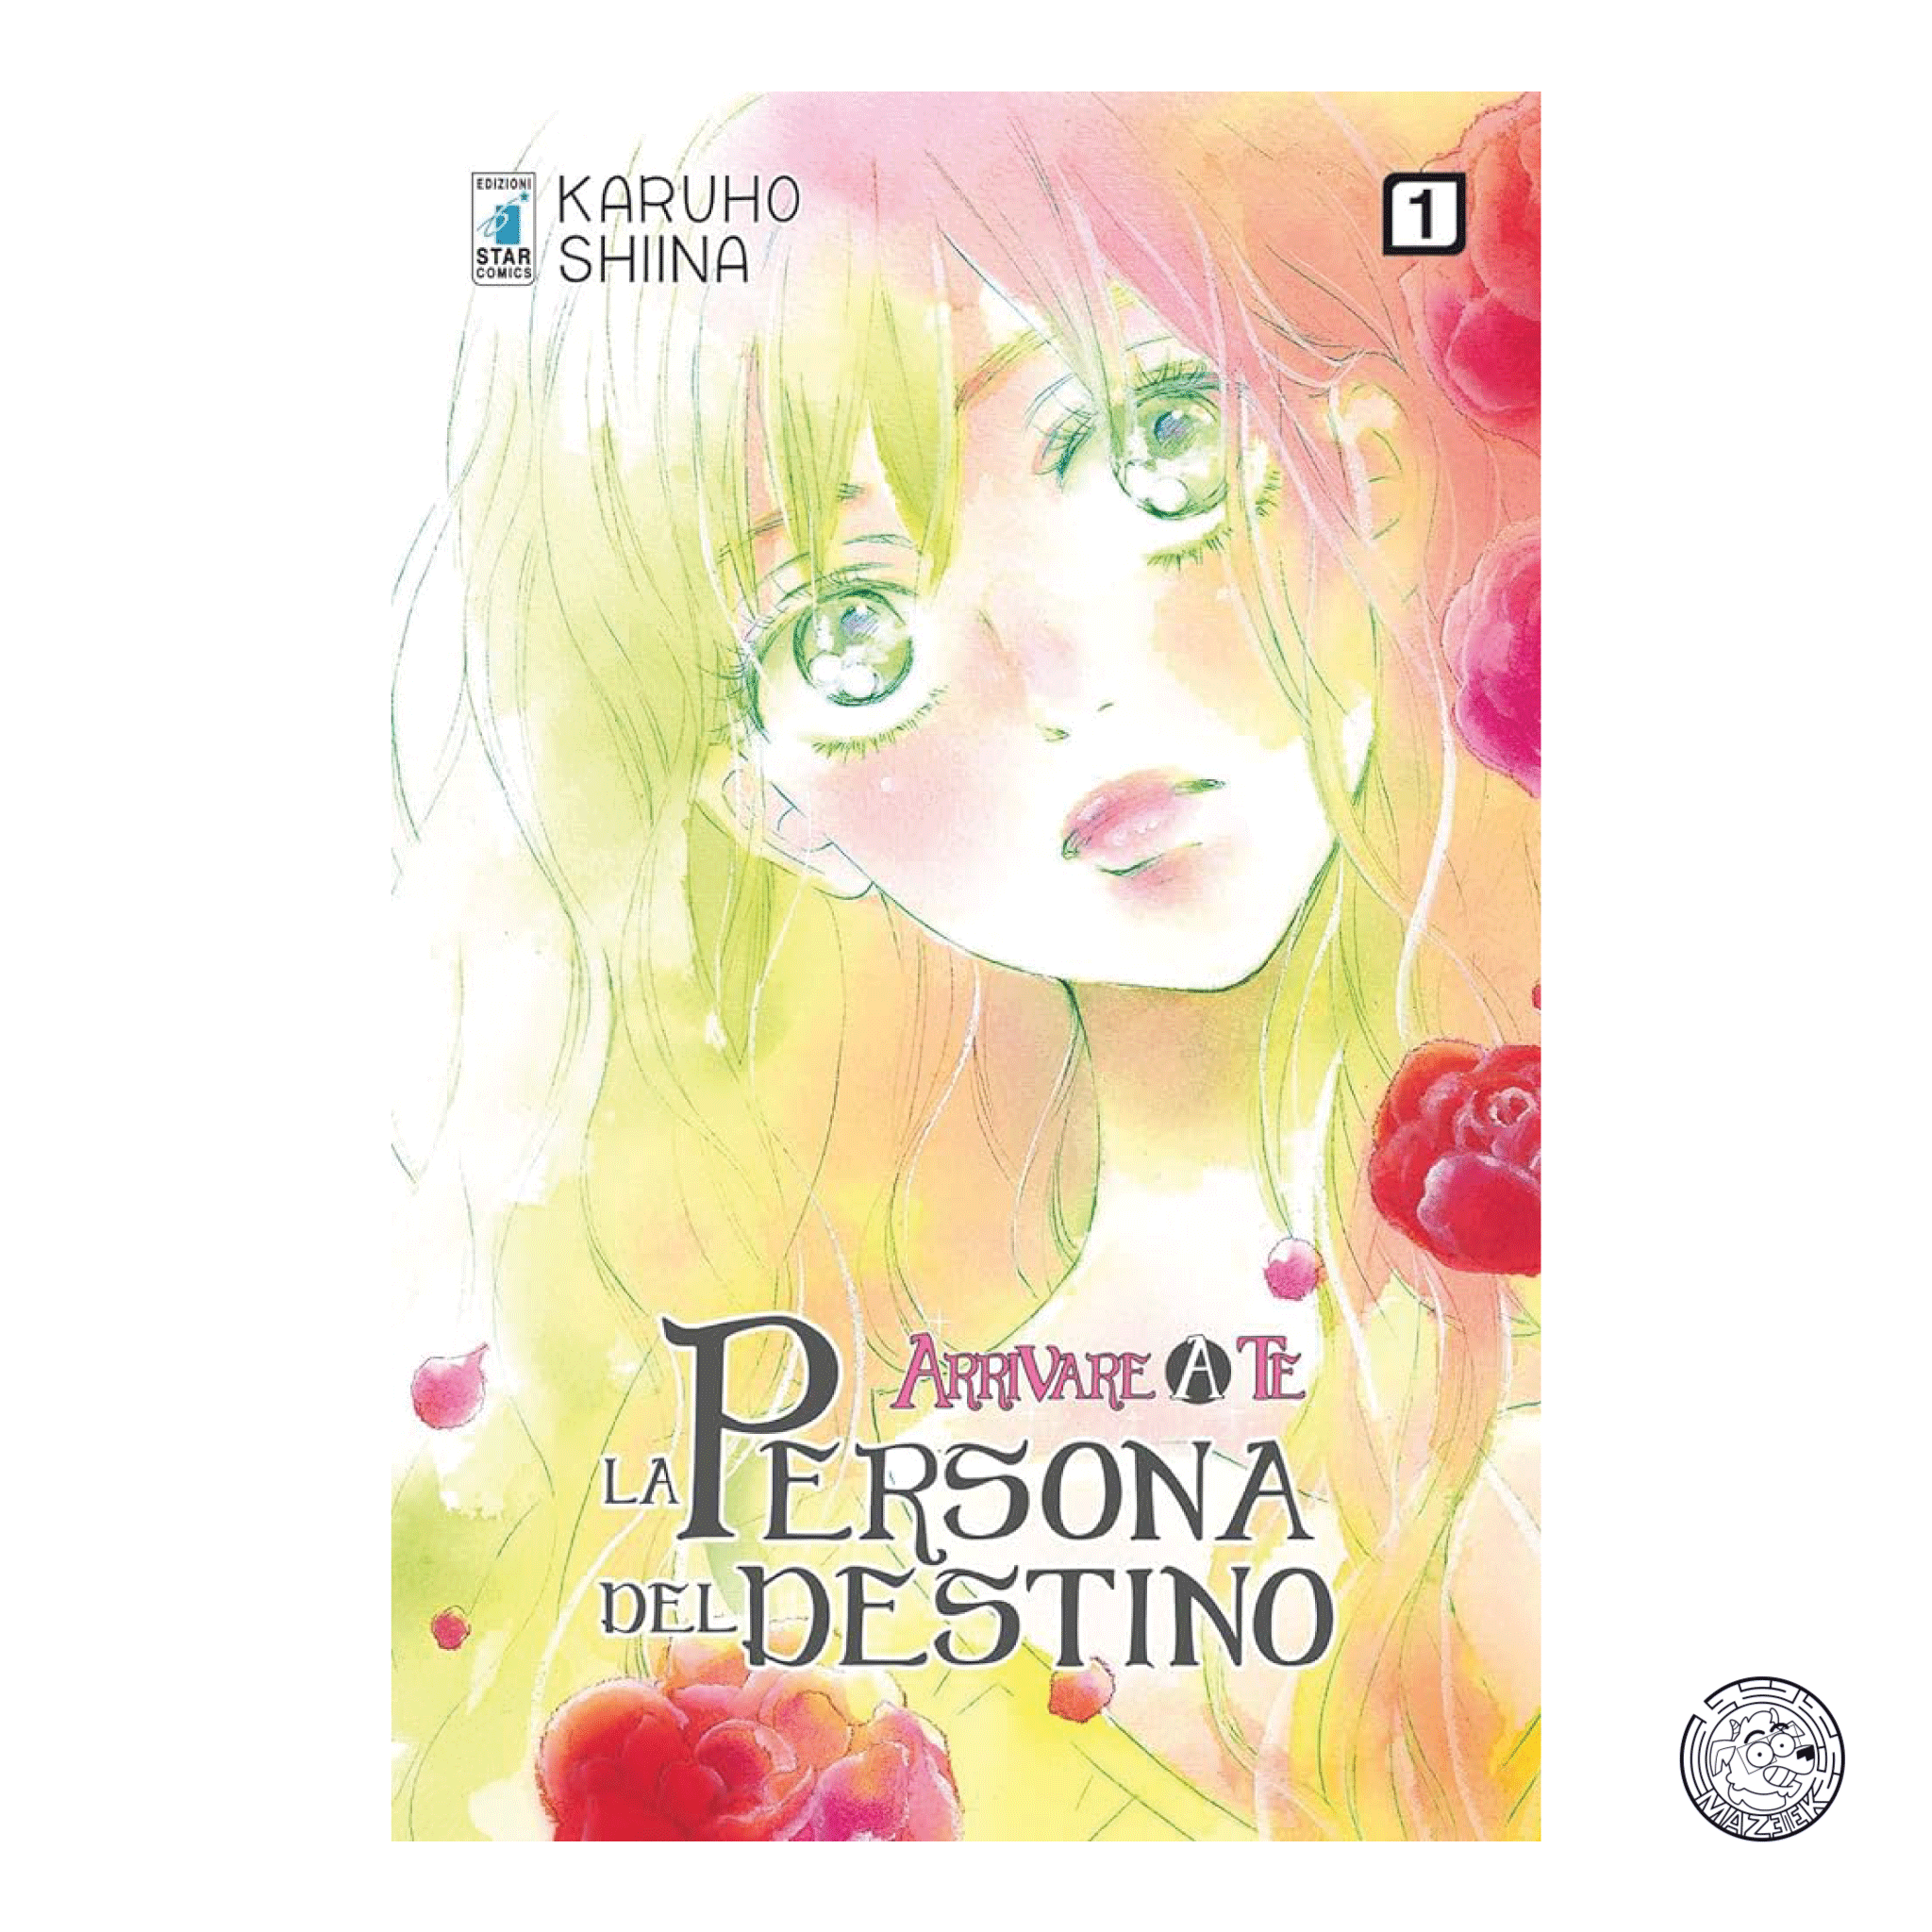 Getting to you the Person of Destiny 01